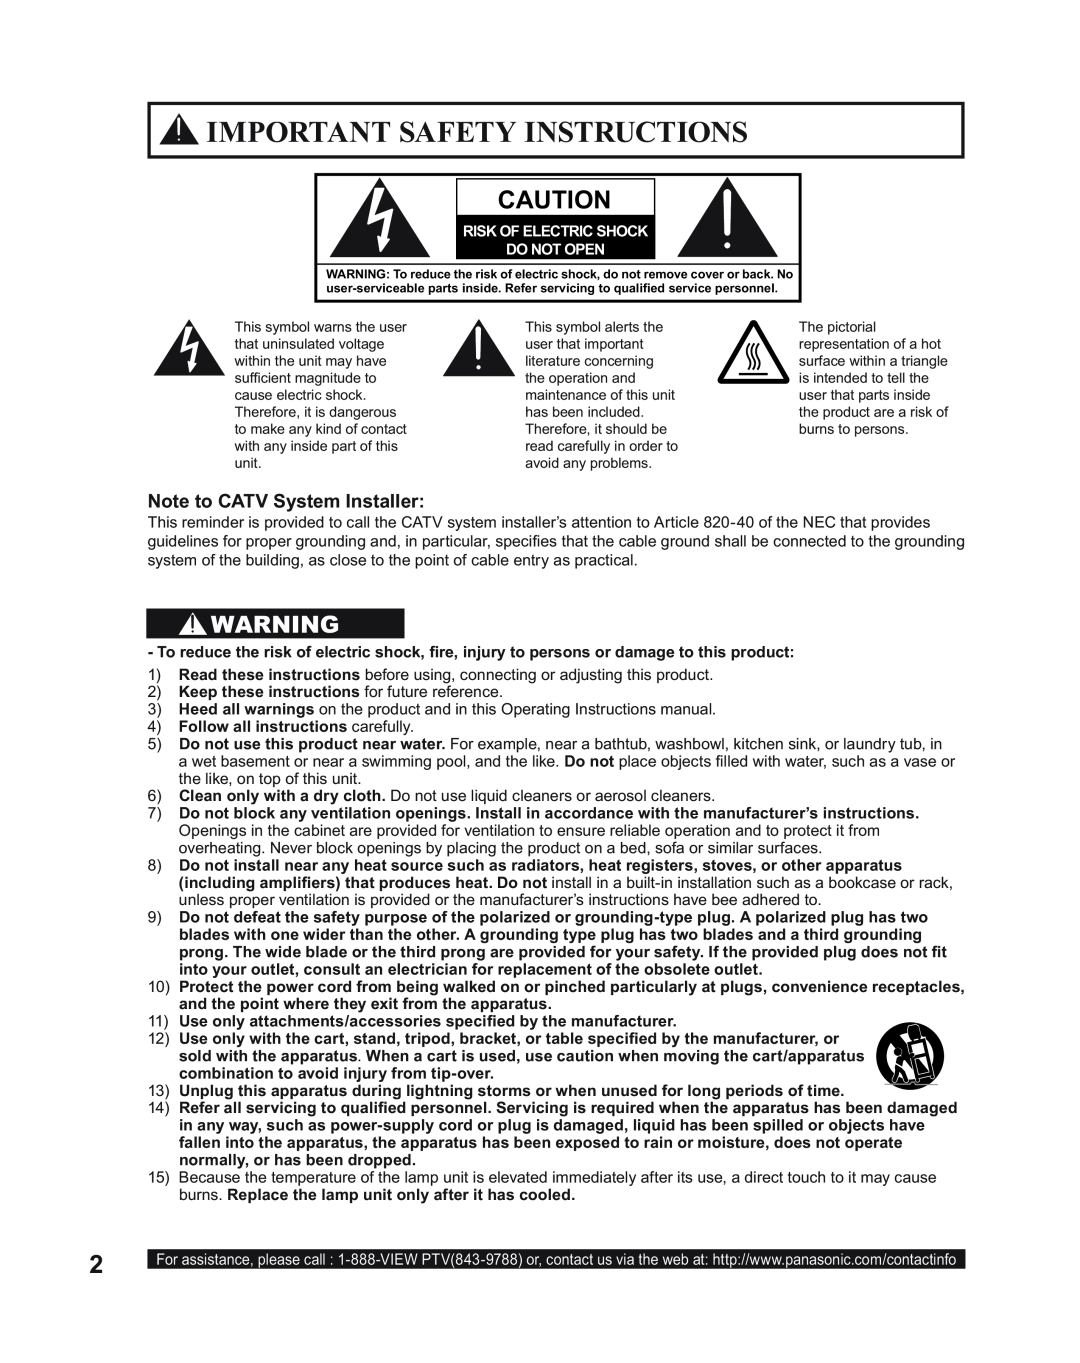 Panasonic PT-60LC14 Important Safety Instructions, Note to CATV System Installer, $87,21, 5,6.2/&75,&6+2, 2127231 